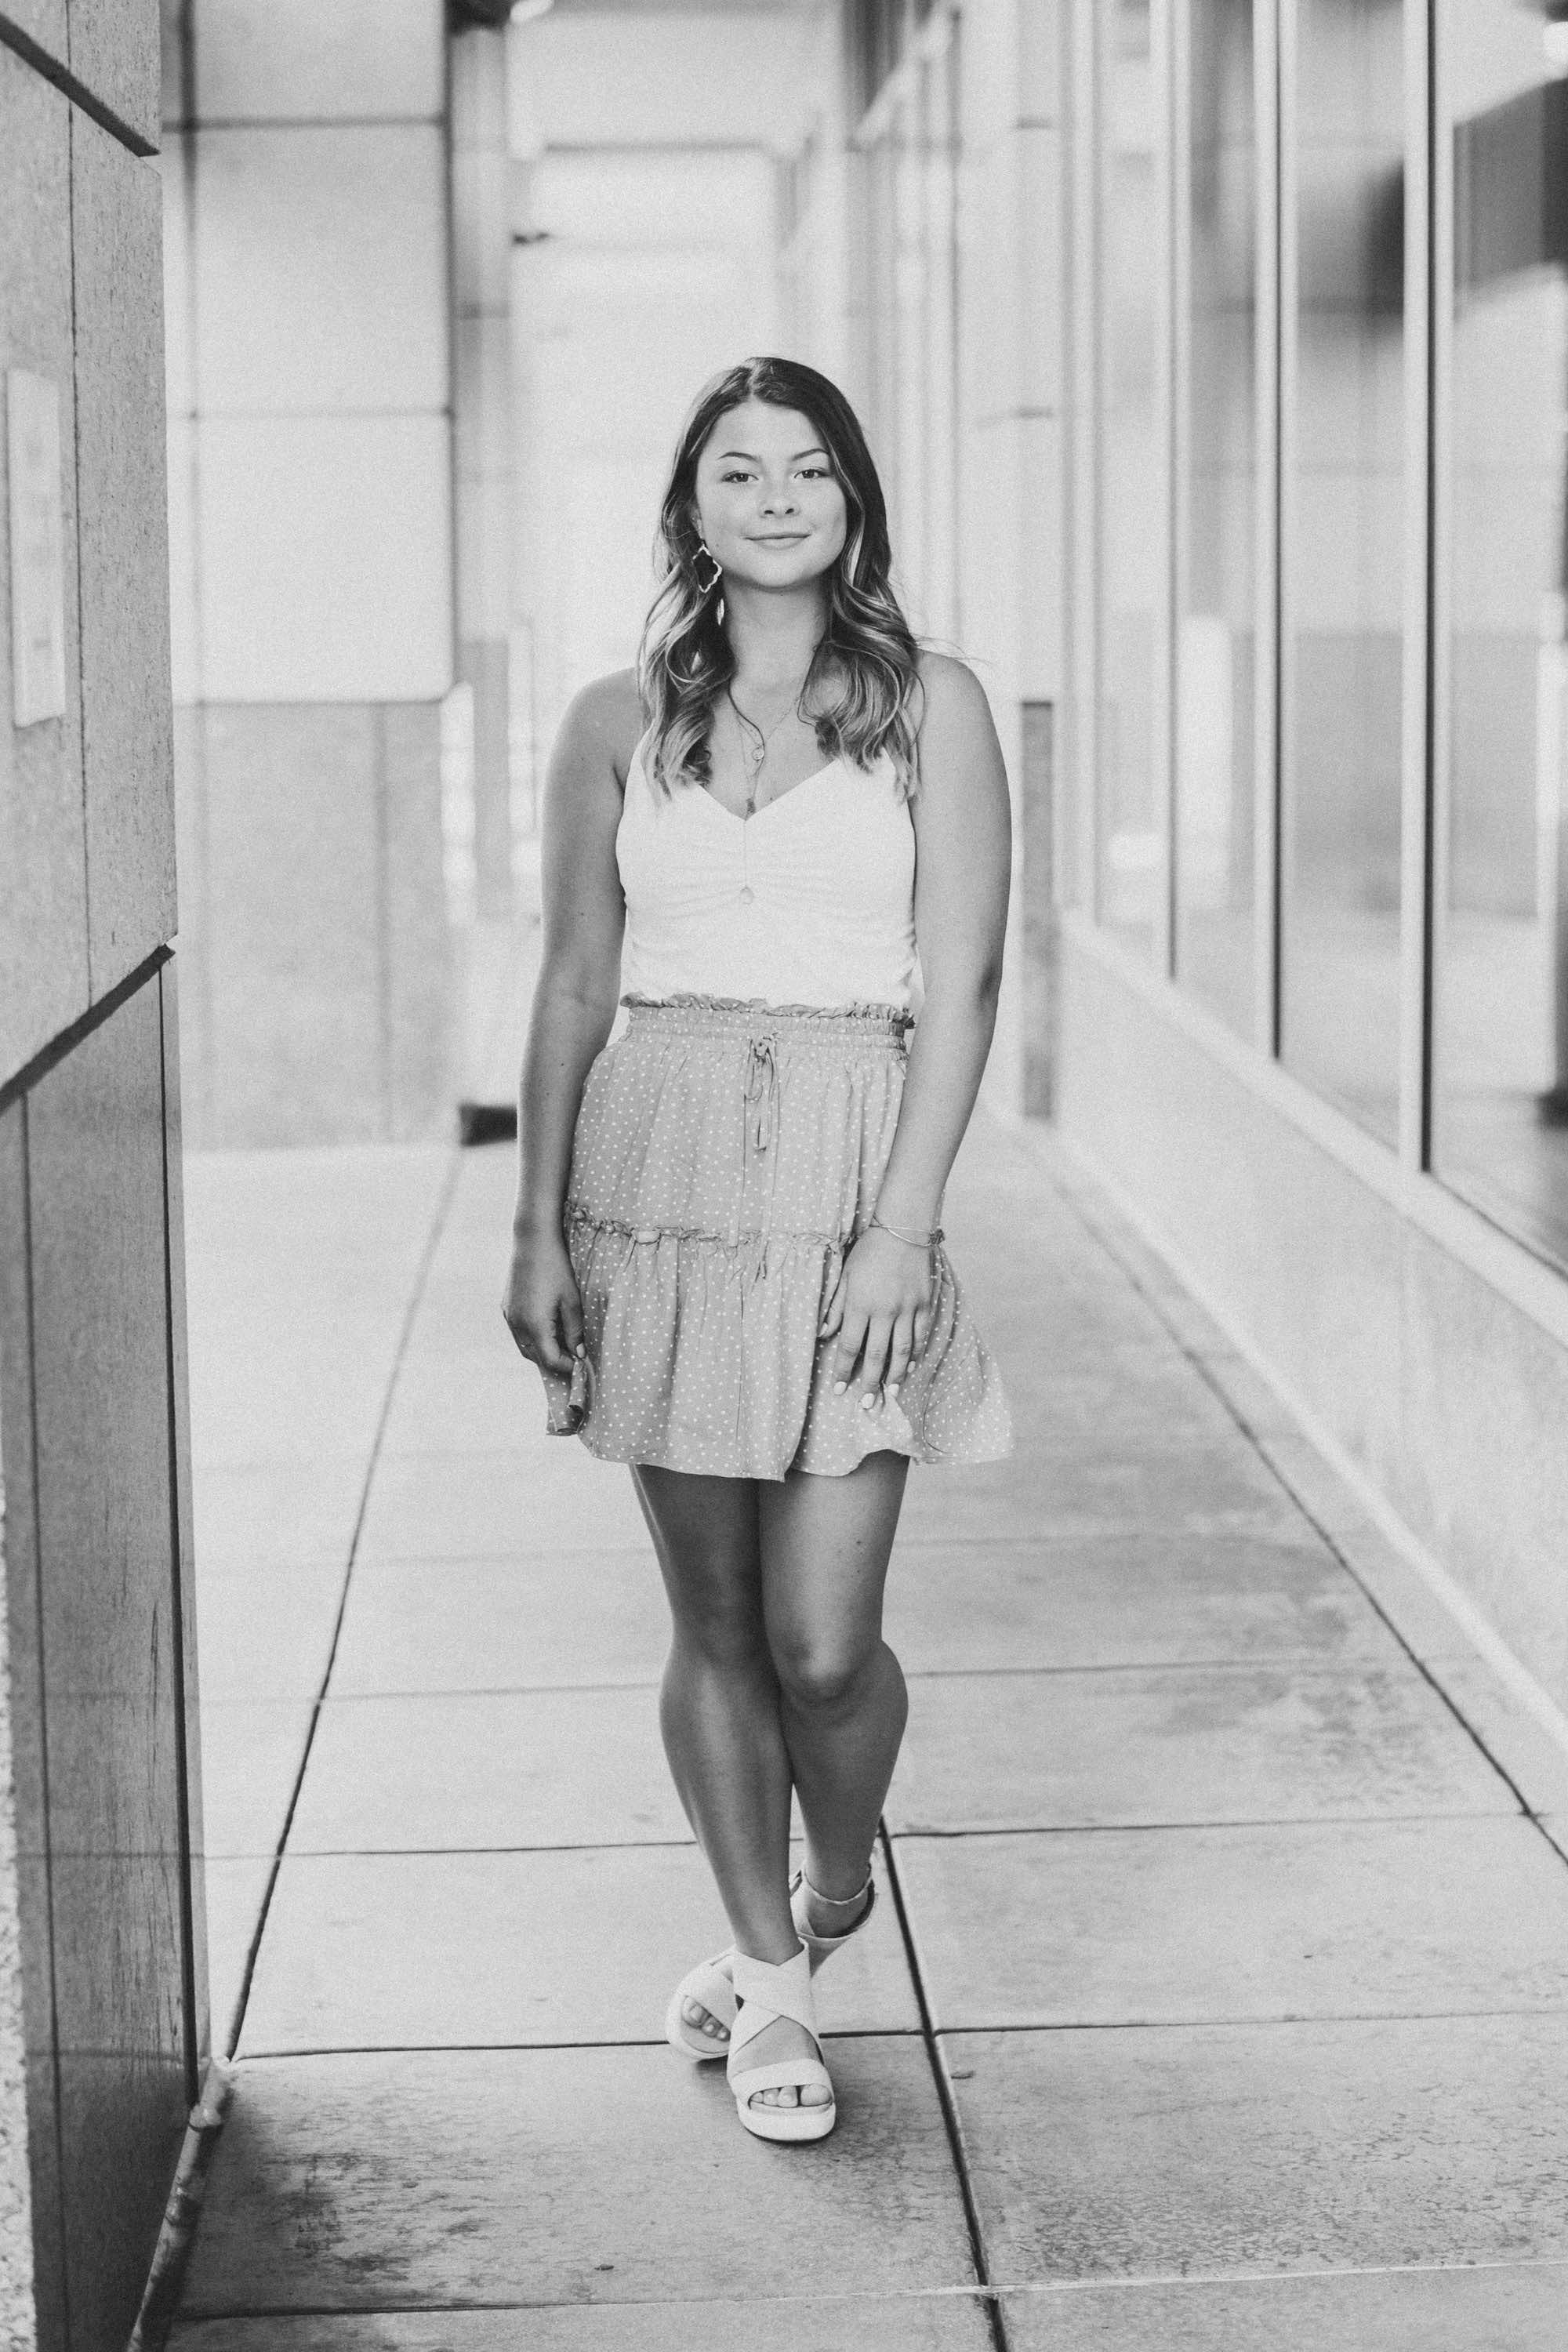 senior photo of young woman smiling on the sidewalk outside a building